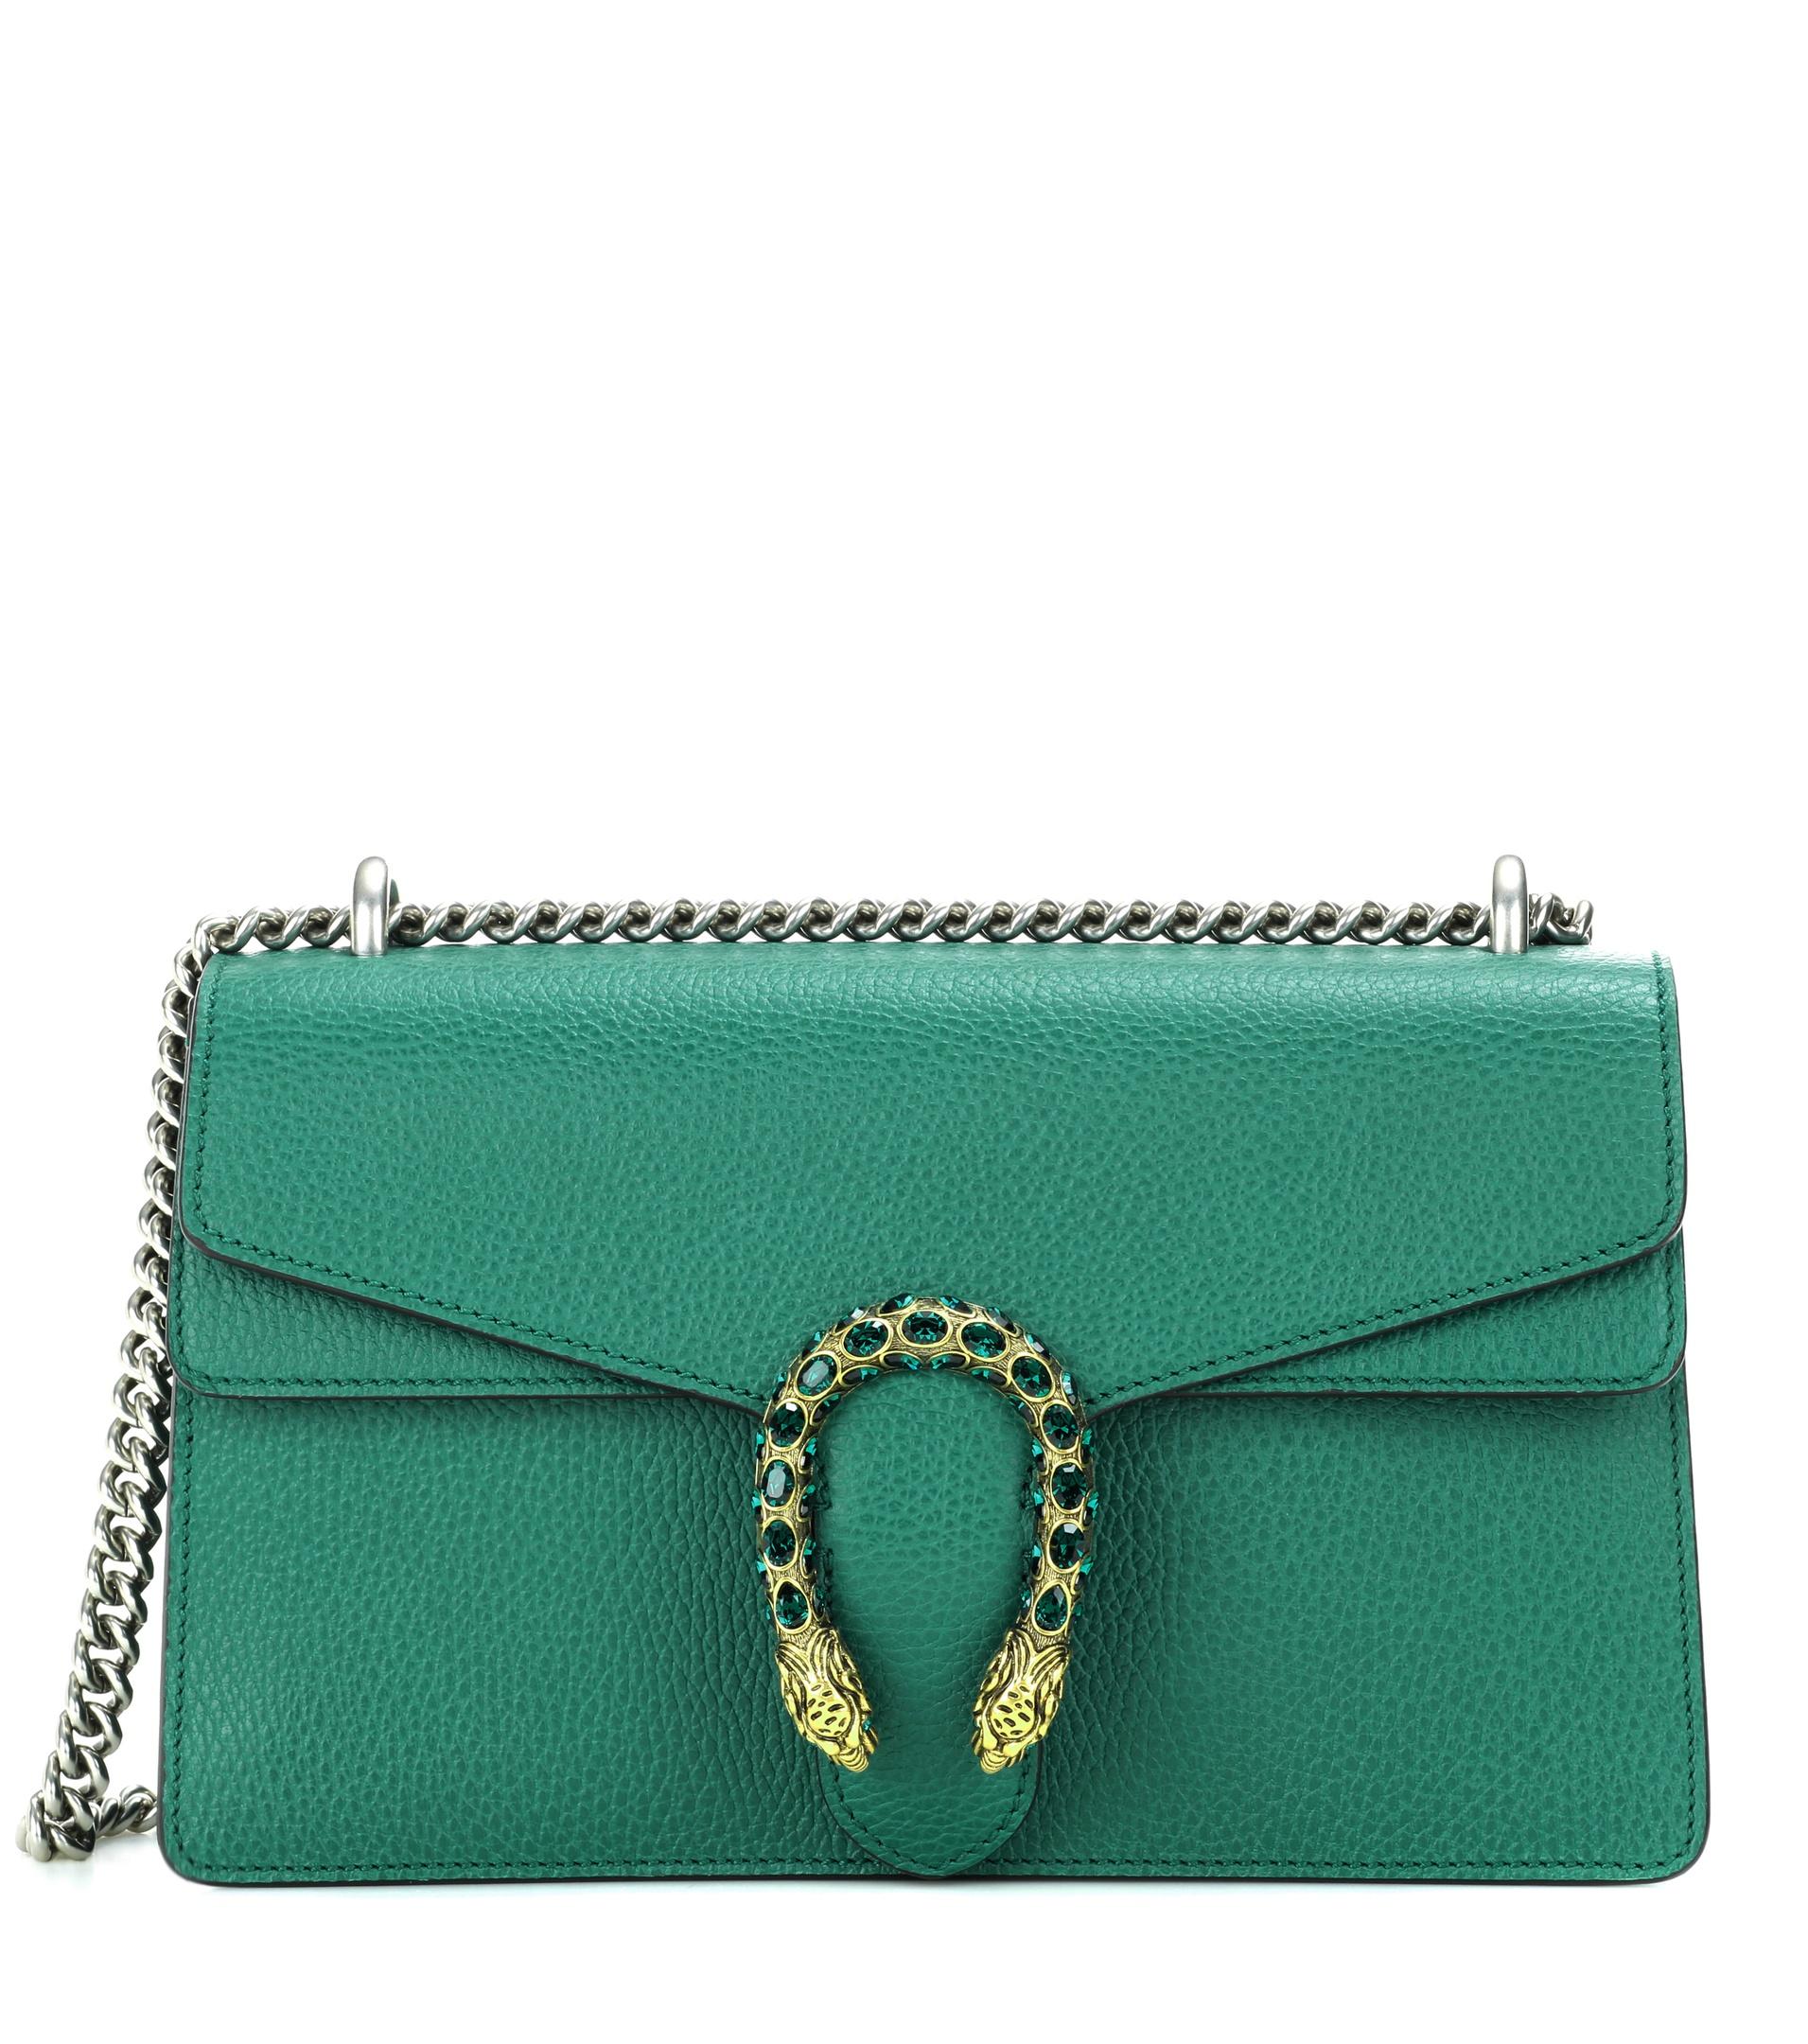 Prelude Gemoedsrust vijand Gucci Dionysus Small Leather Shoulder Bag in Green | Lyst